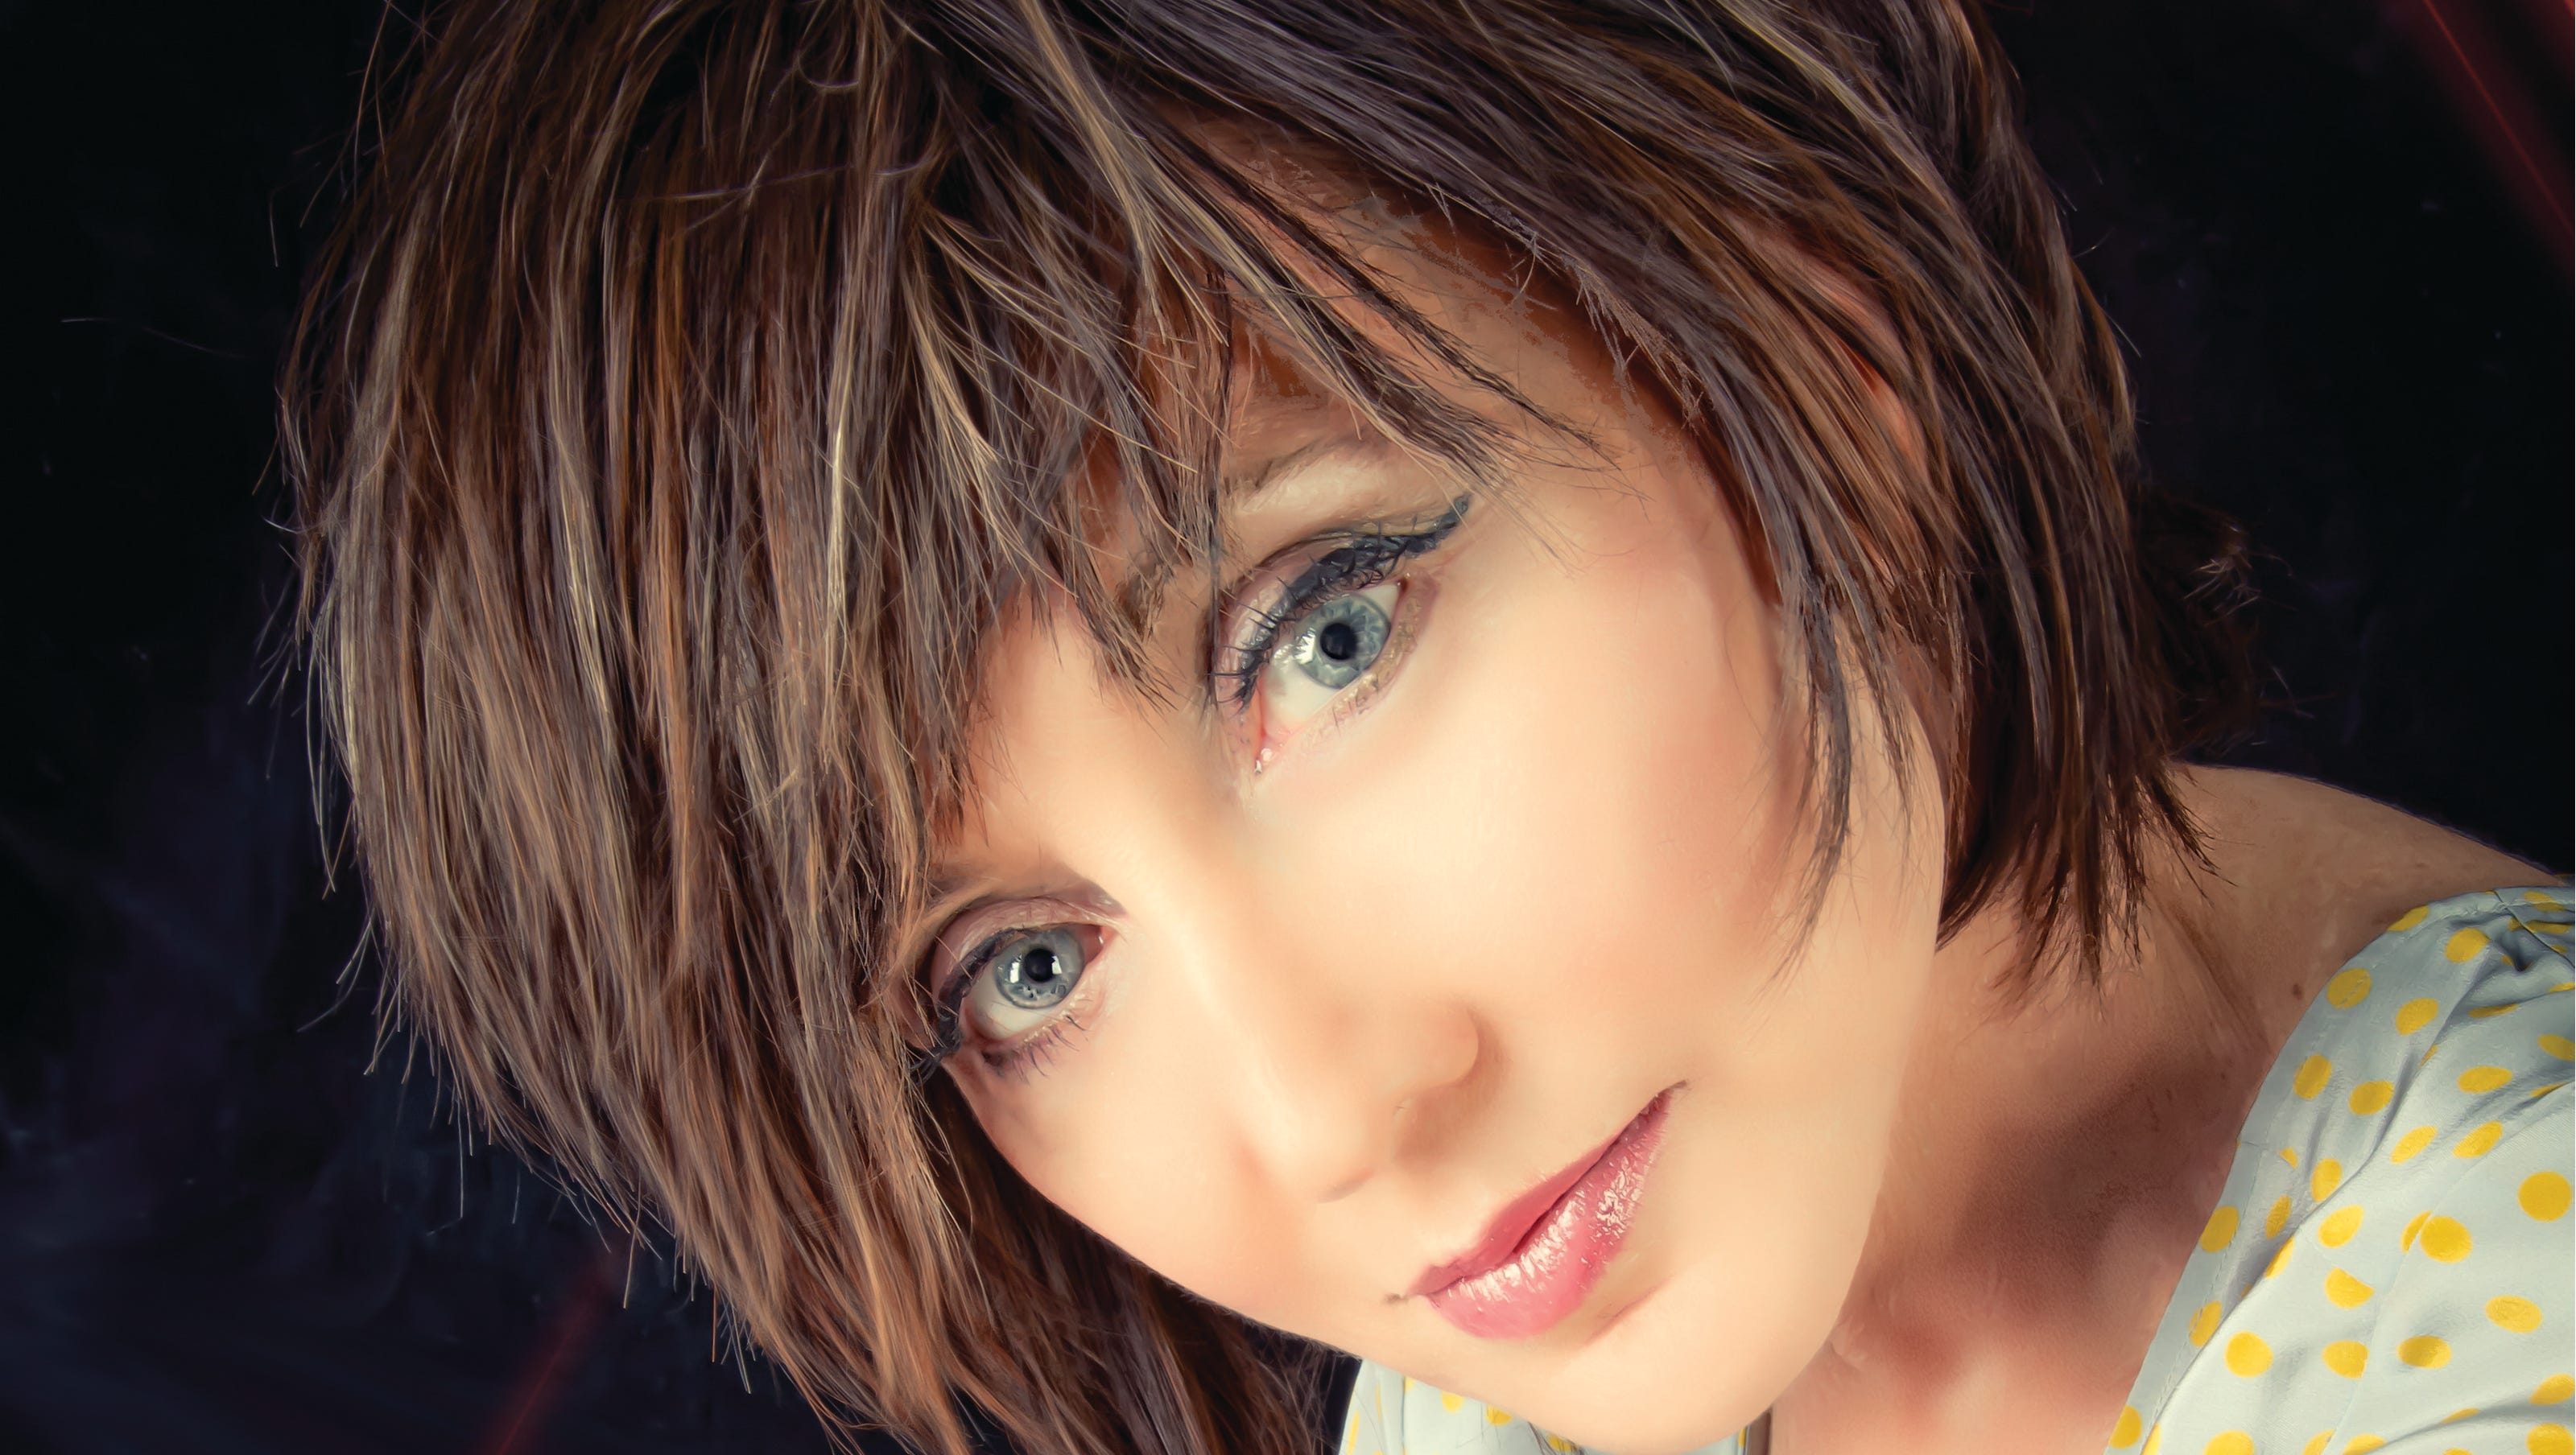 Pam Tillis To Debut New Music At Franklin Theatre